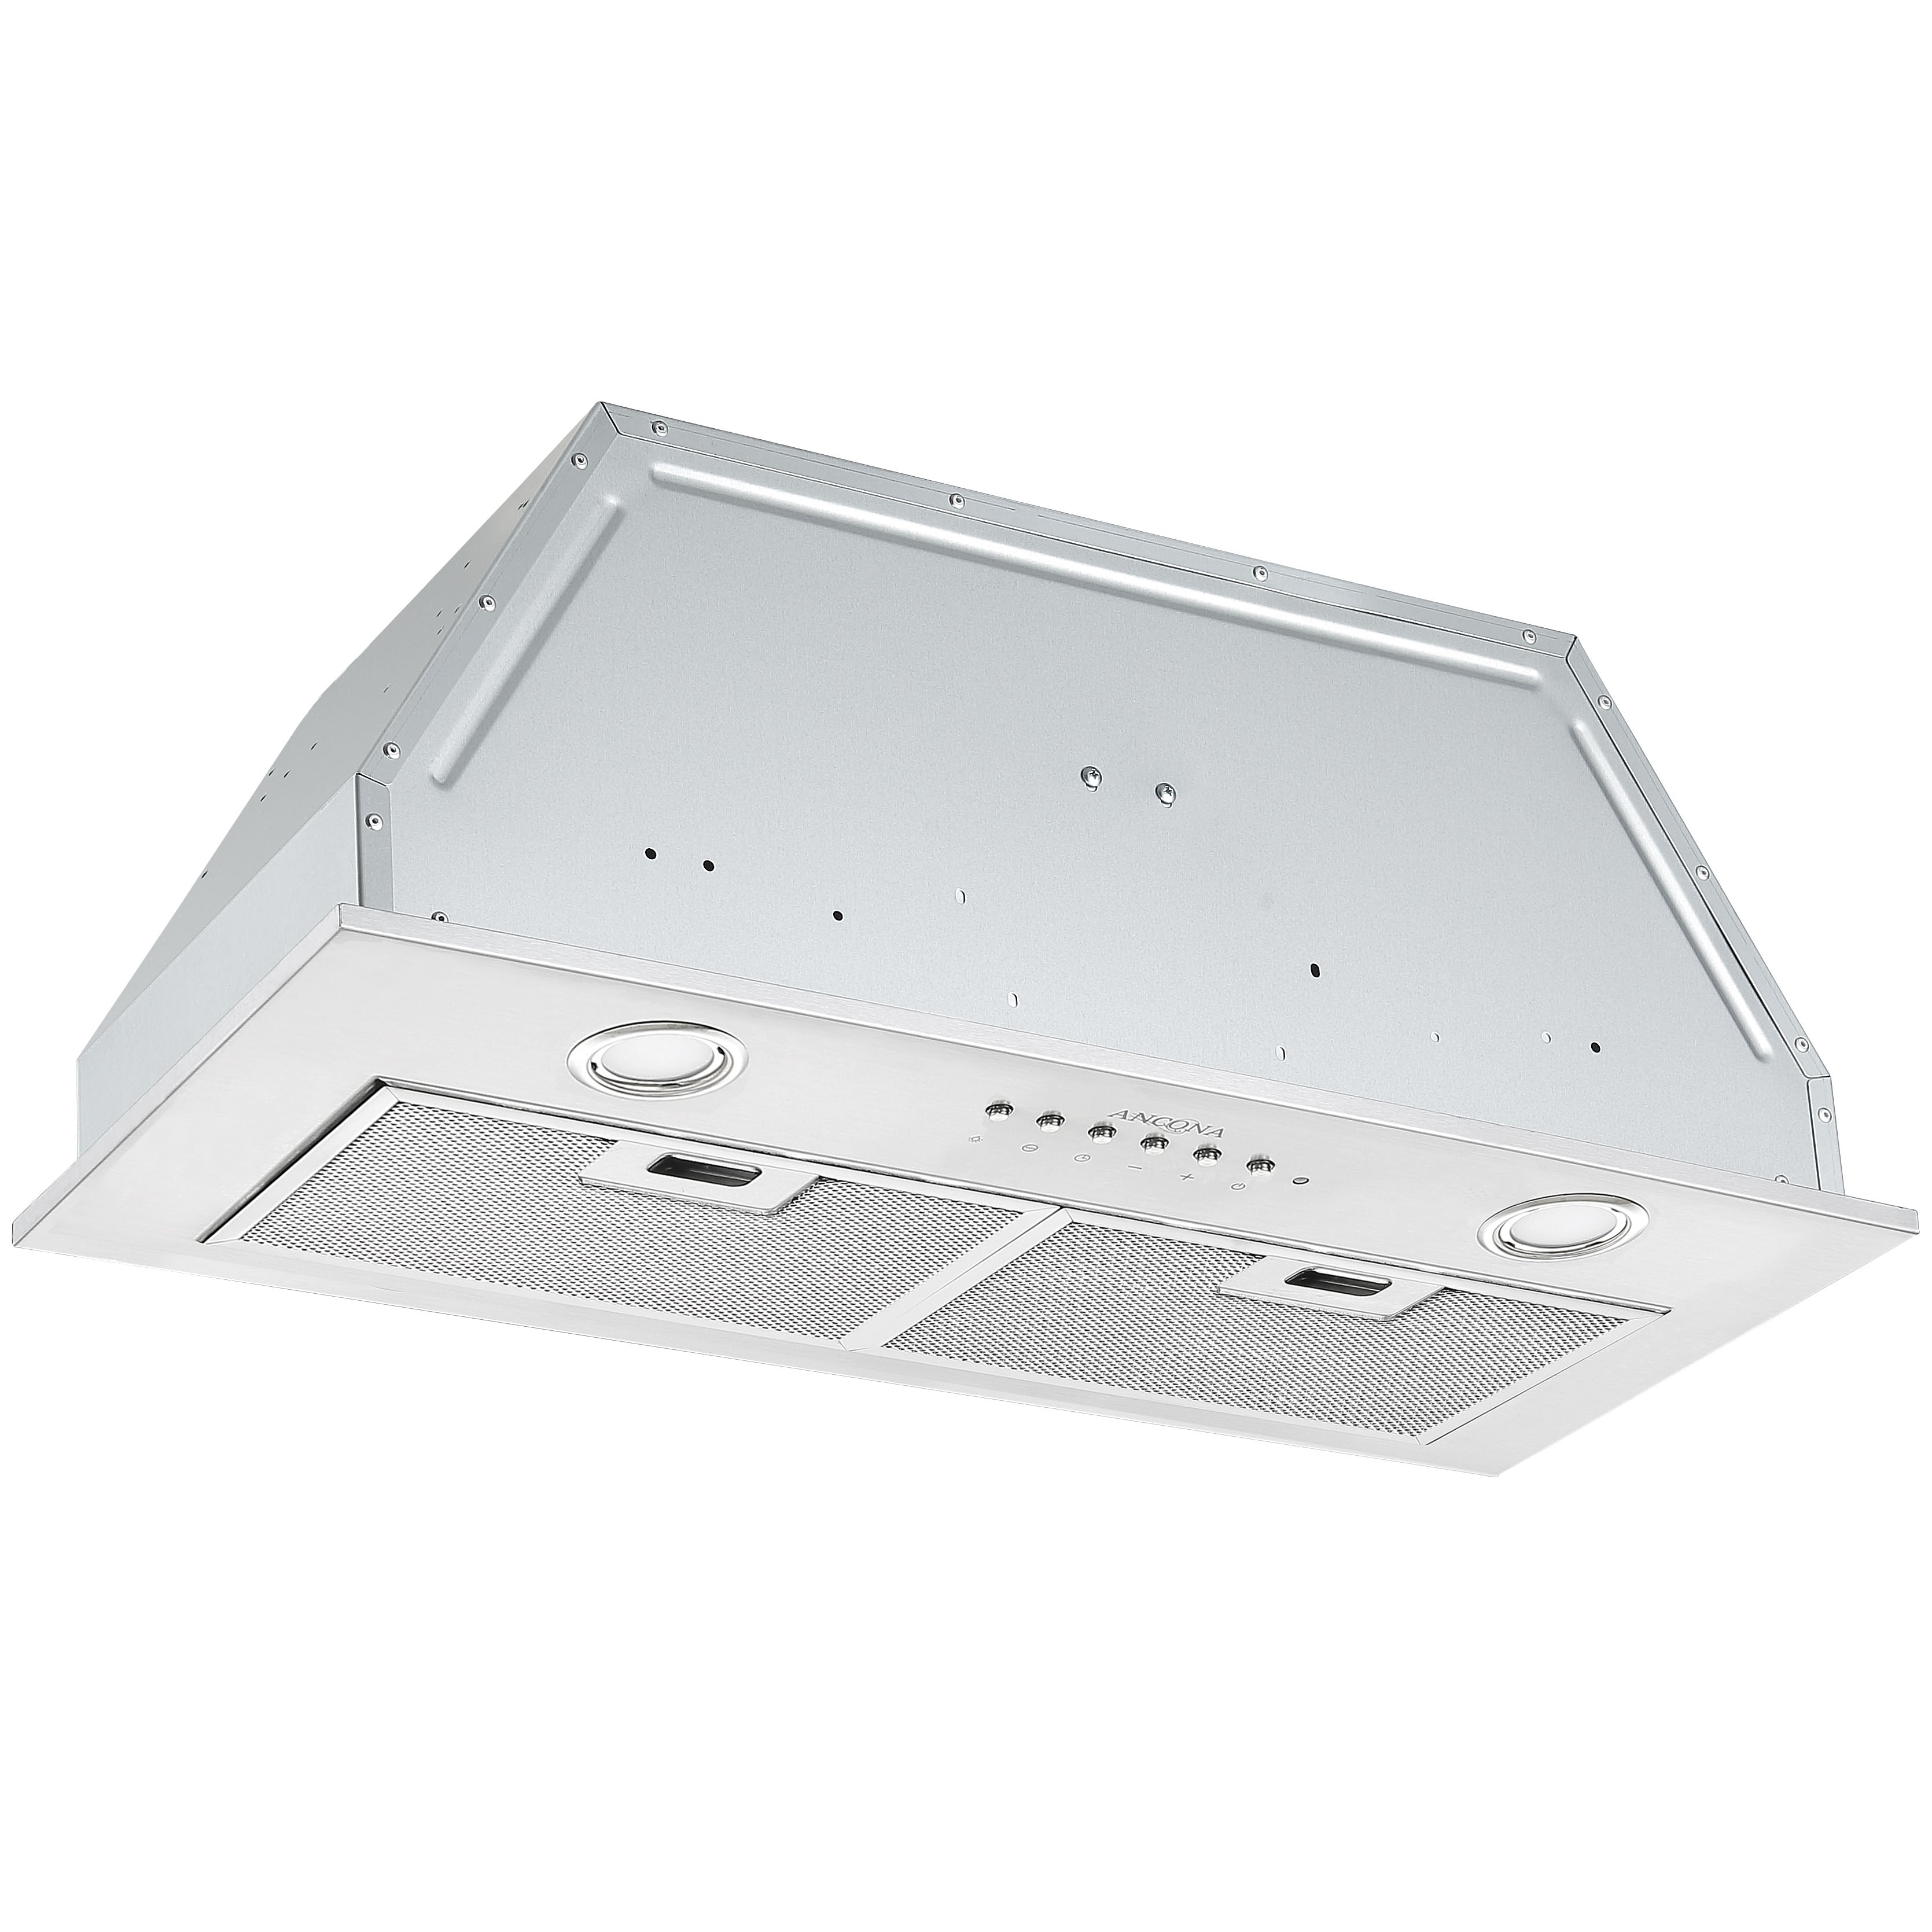 28 in. Built-in BNL430 420 CFM Ducted Range Hood with Night Light Feature